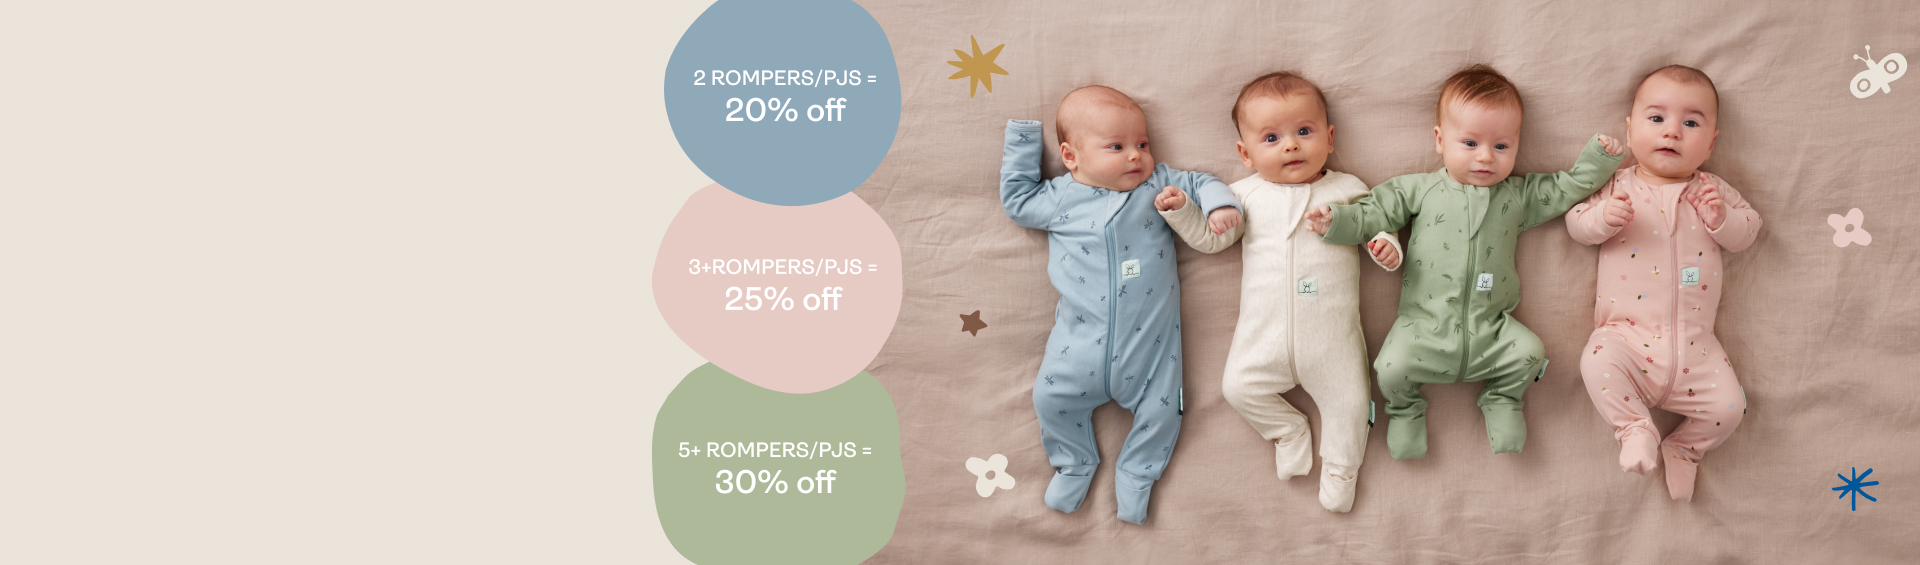 Buy 2 pajamas or rompers, save 20%off, buy 3 save 25%, buy 5 or more save 30%